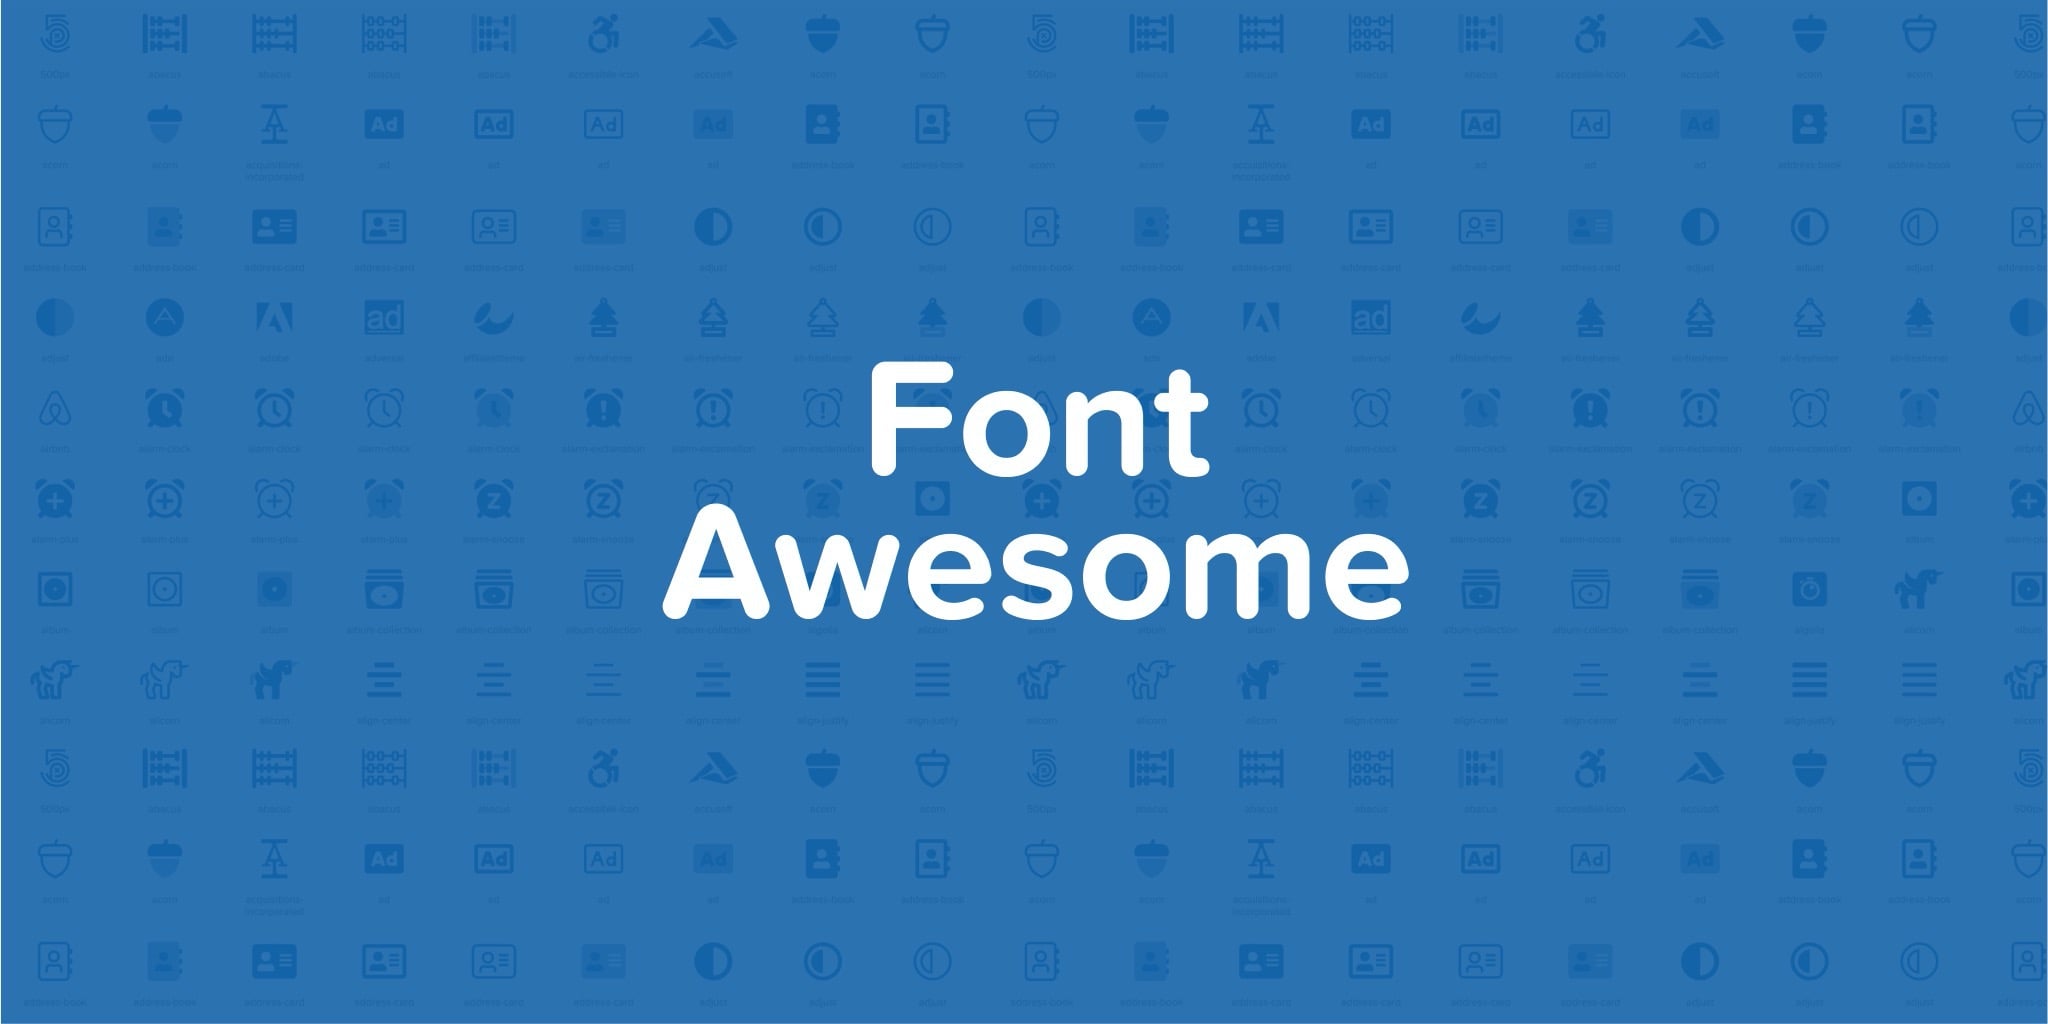 Font Awesome Icons 플러그인의 대표 이미지